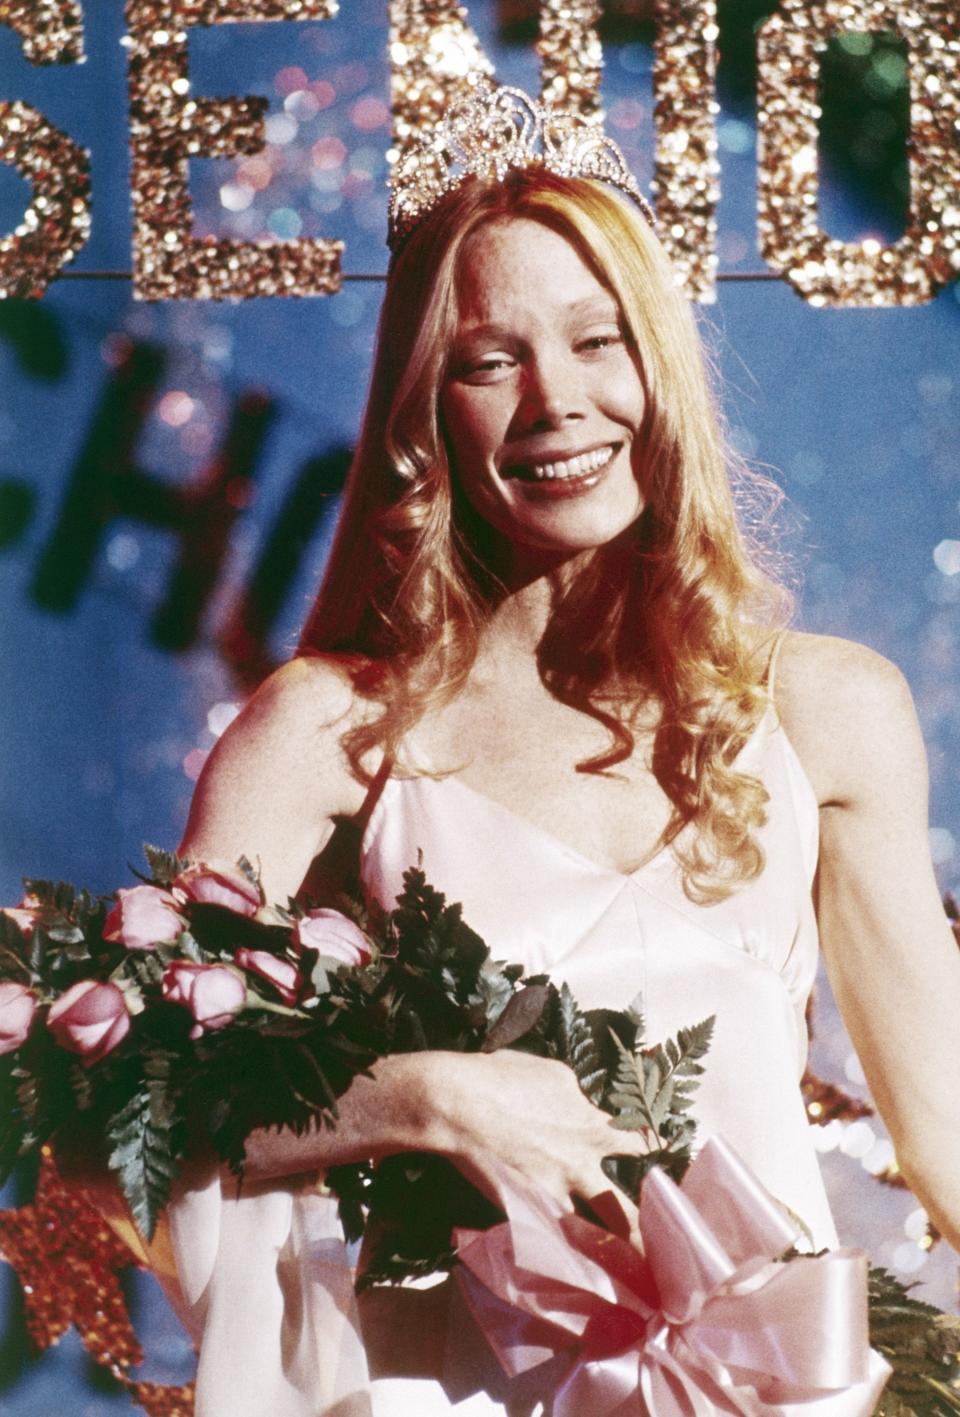 Carrie after being crowned prom queen